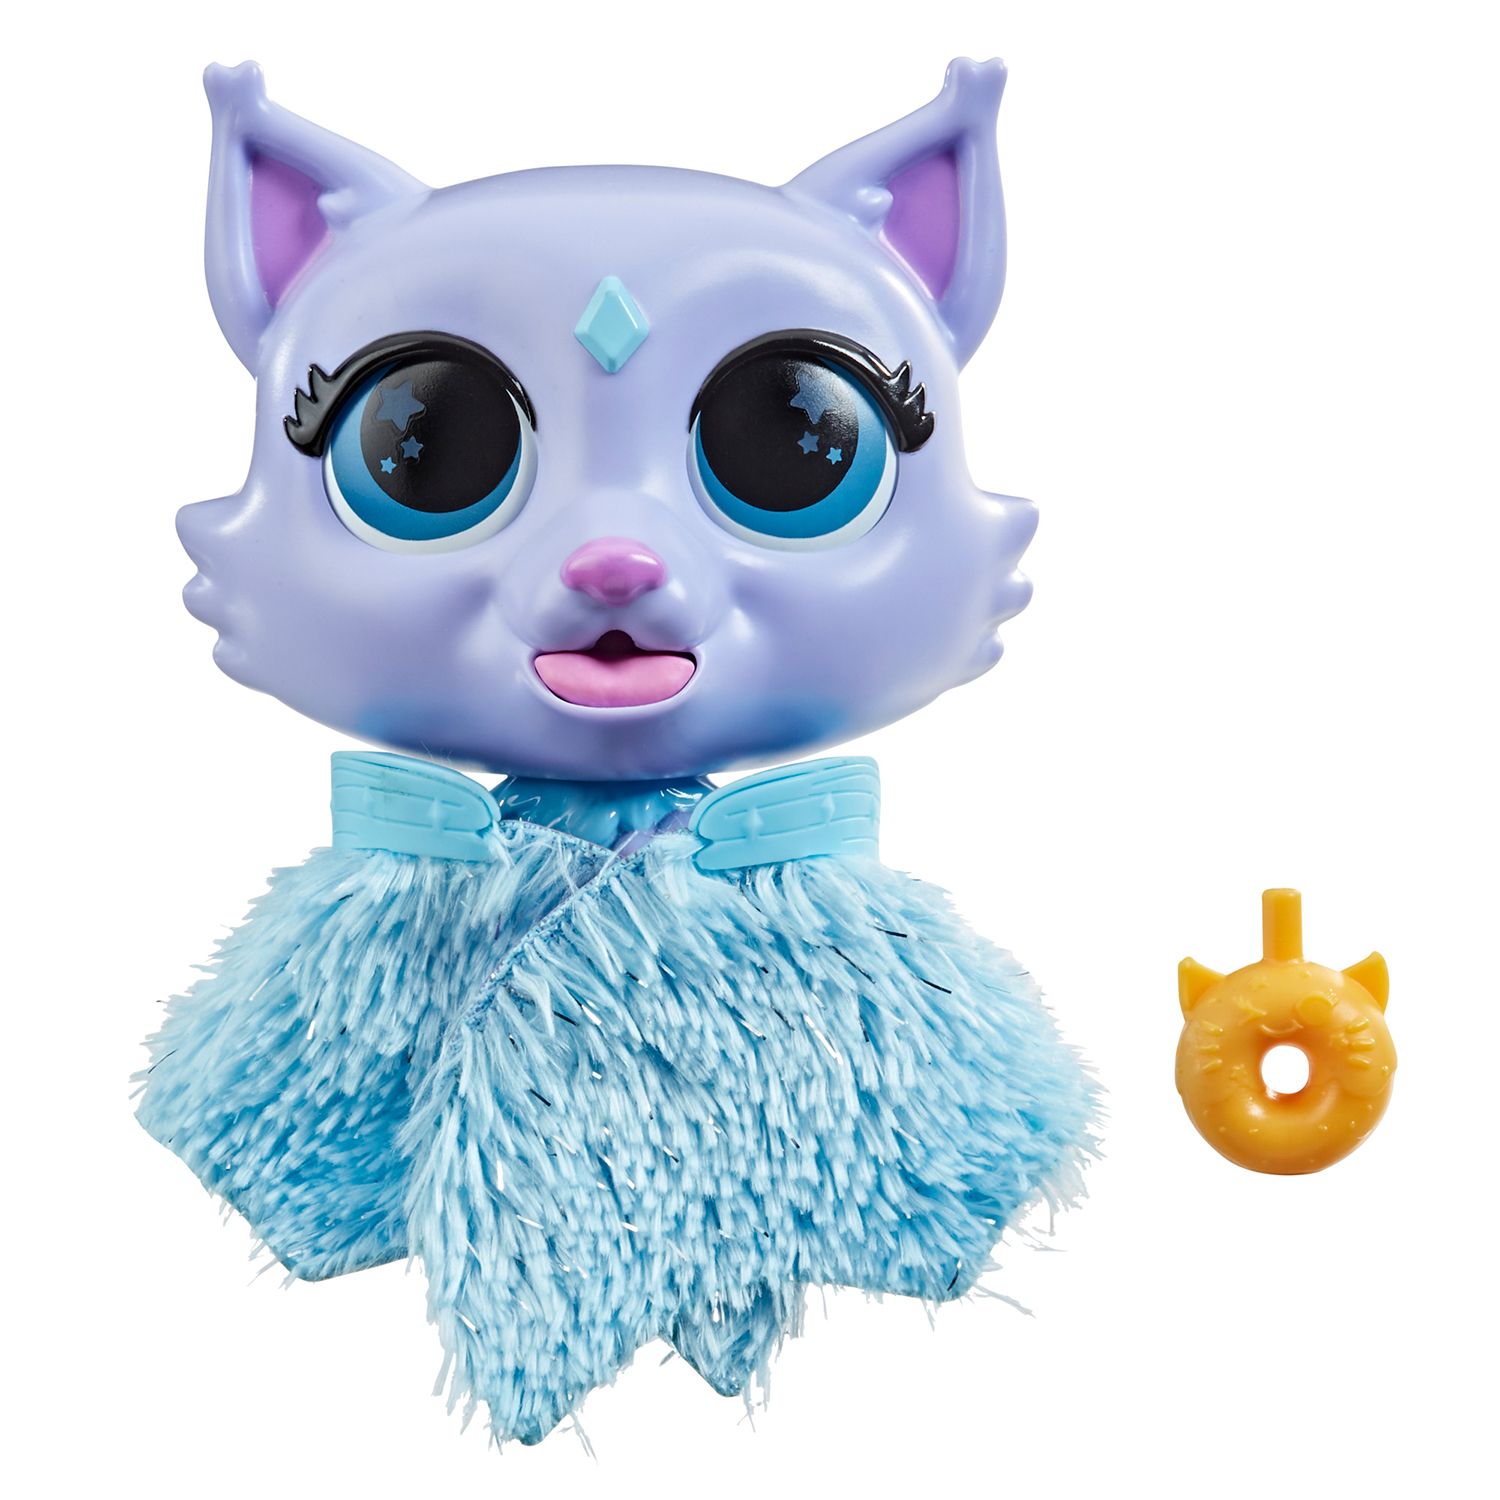 Image for Hasbro furReal Flitter the Kitten by at Kohl's.